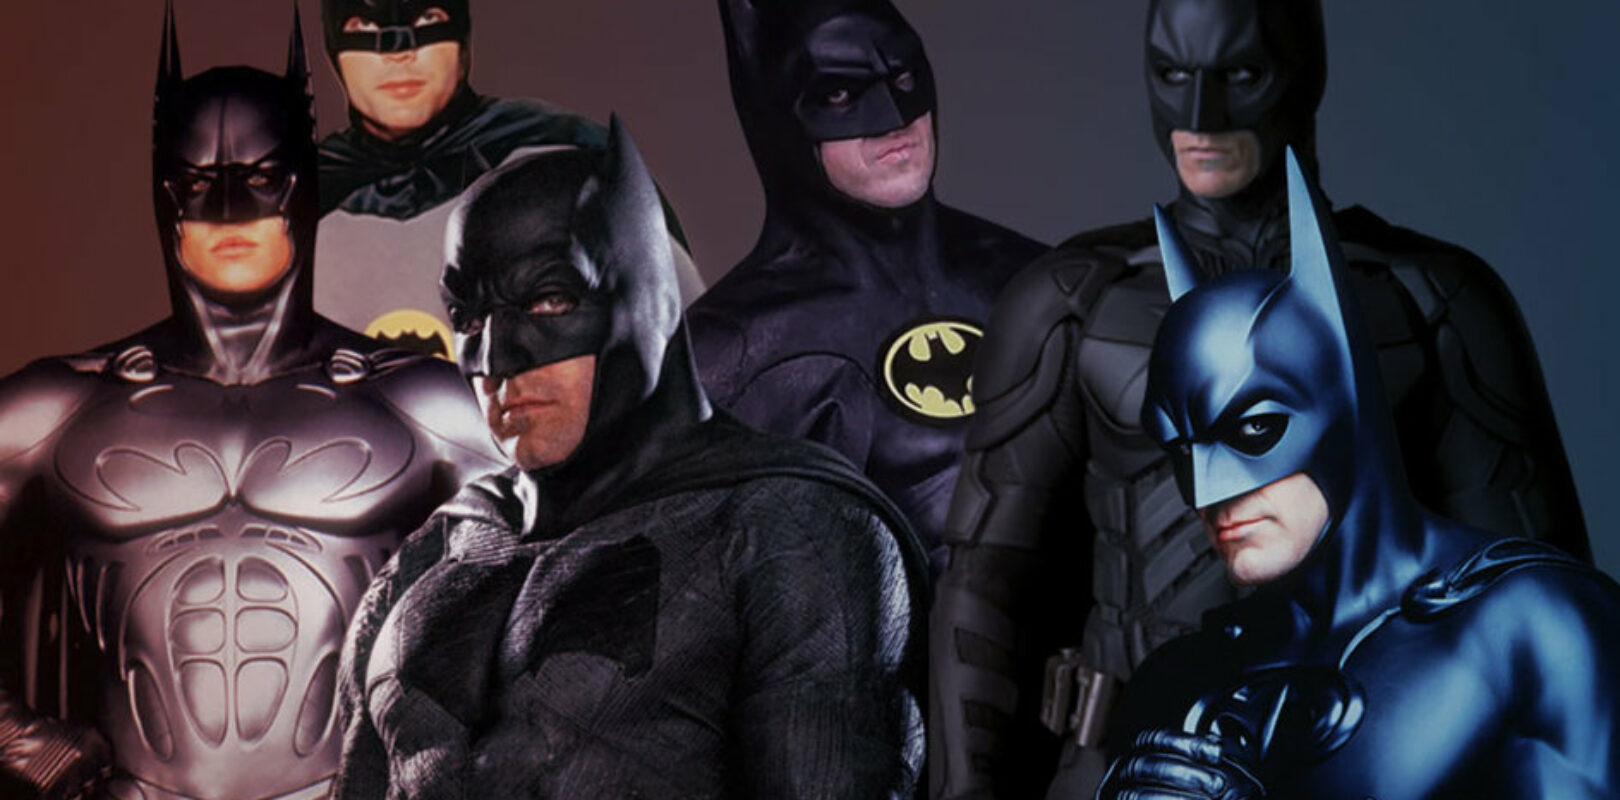 Batman Movie Appearances Ranked from Worst to Best - Marooners' Rock